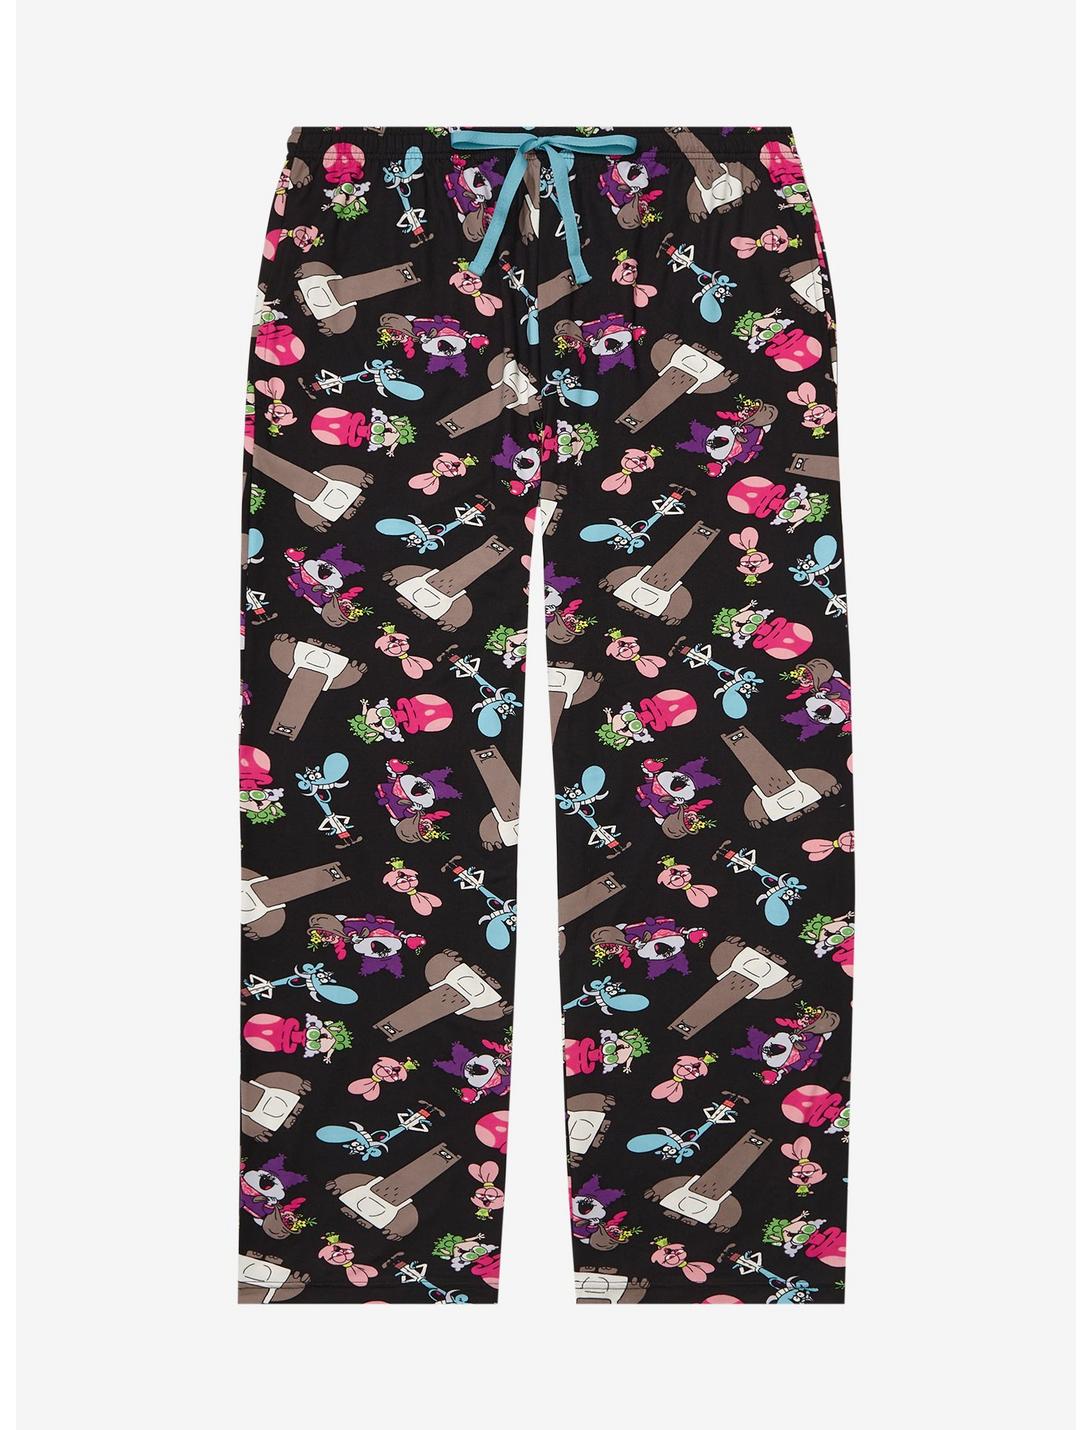 Chowder Characters Allover Print Women's Plus Size Sleep Pants - BoxLunch Exclusive, BLACK, hi-res